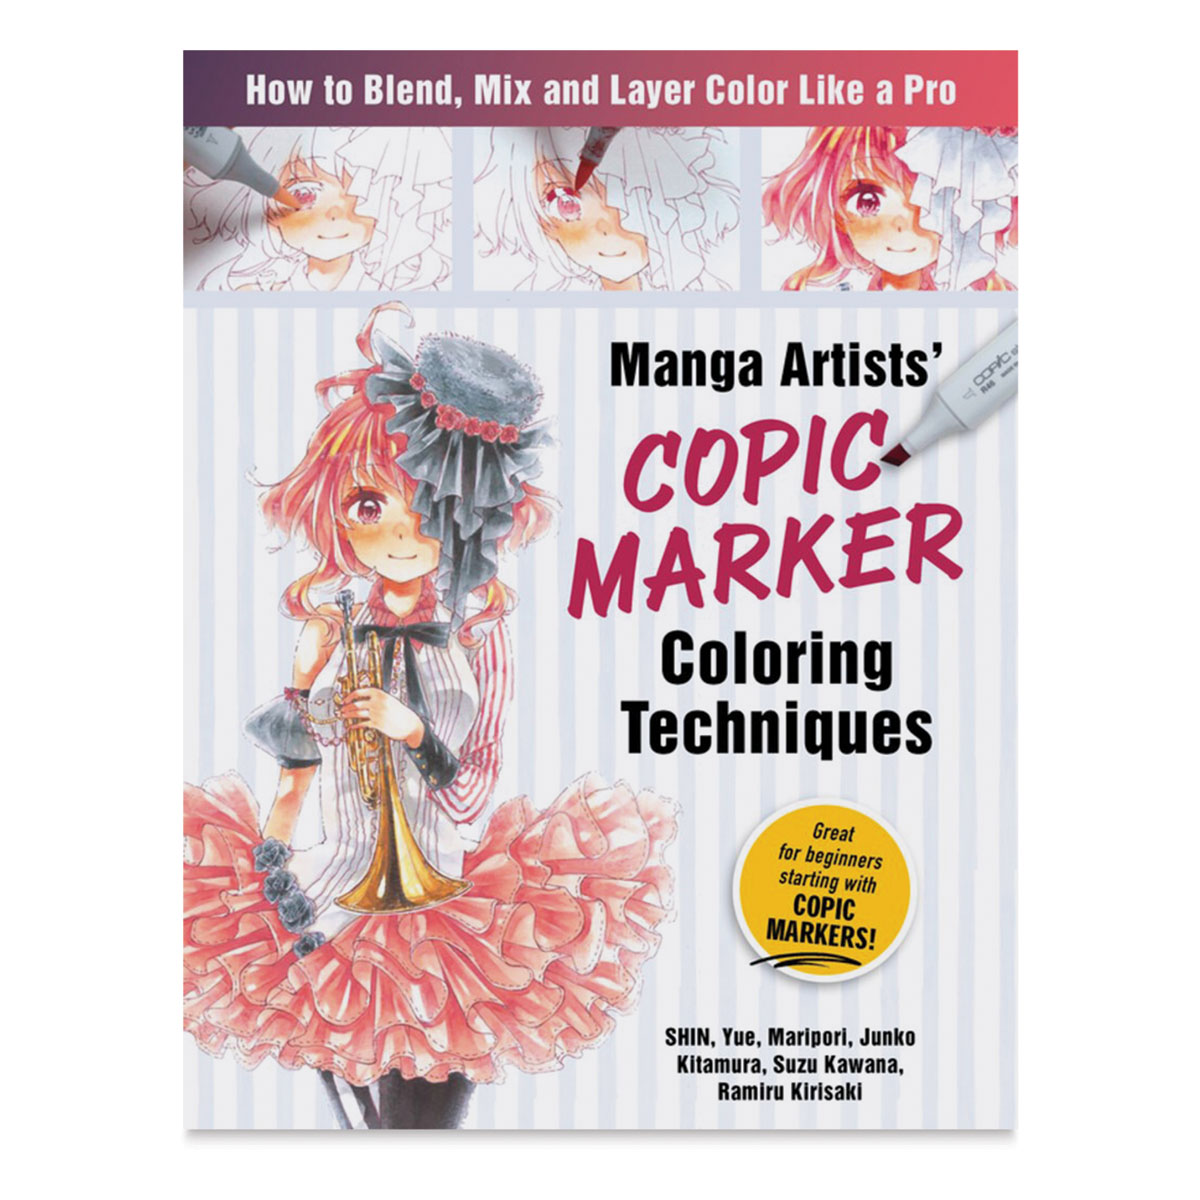 Manga Artists' Copic Marker Coloring Techniques